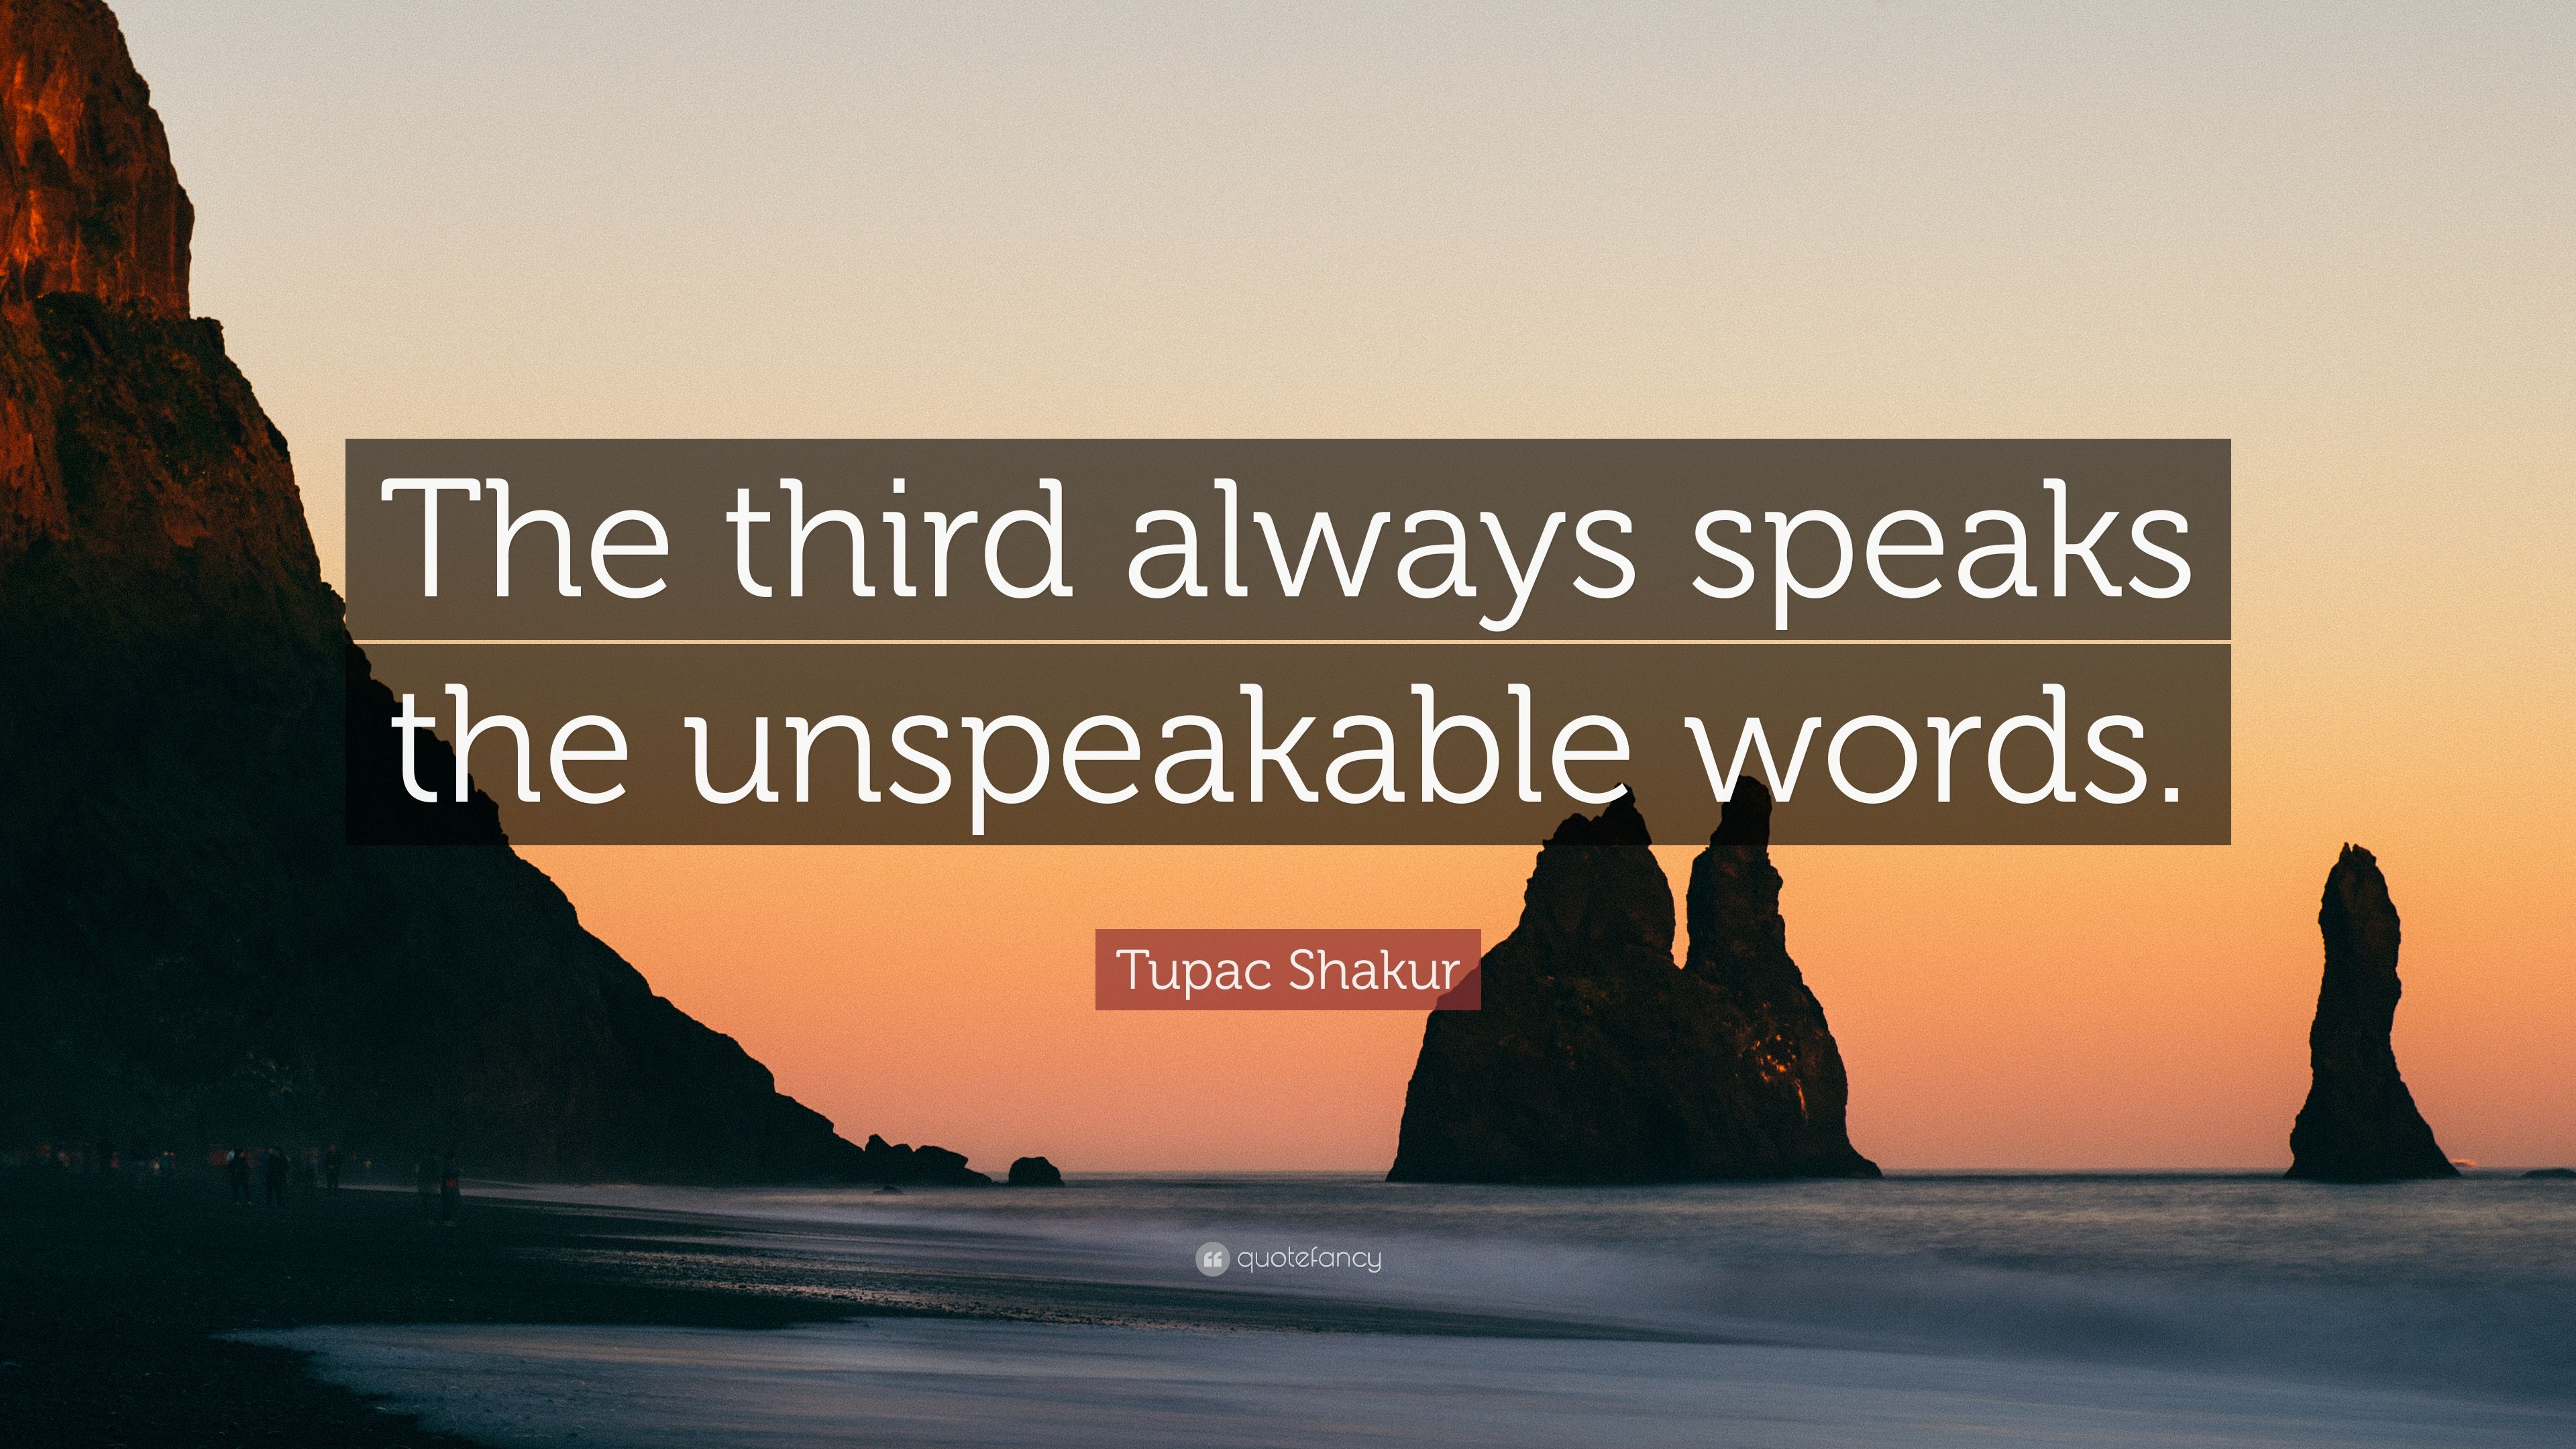 Tupac Shakur Quote: “The third always speaks the unspeakable words